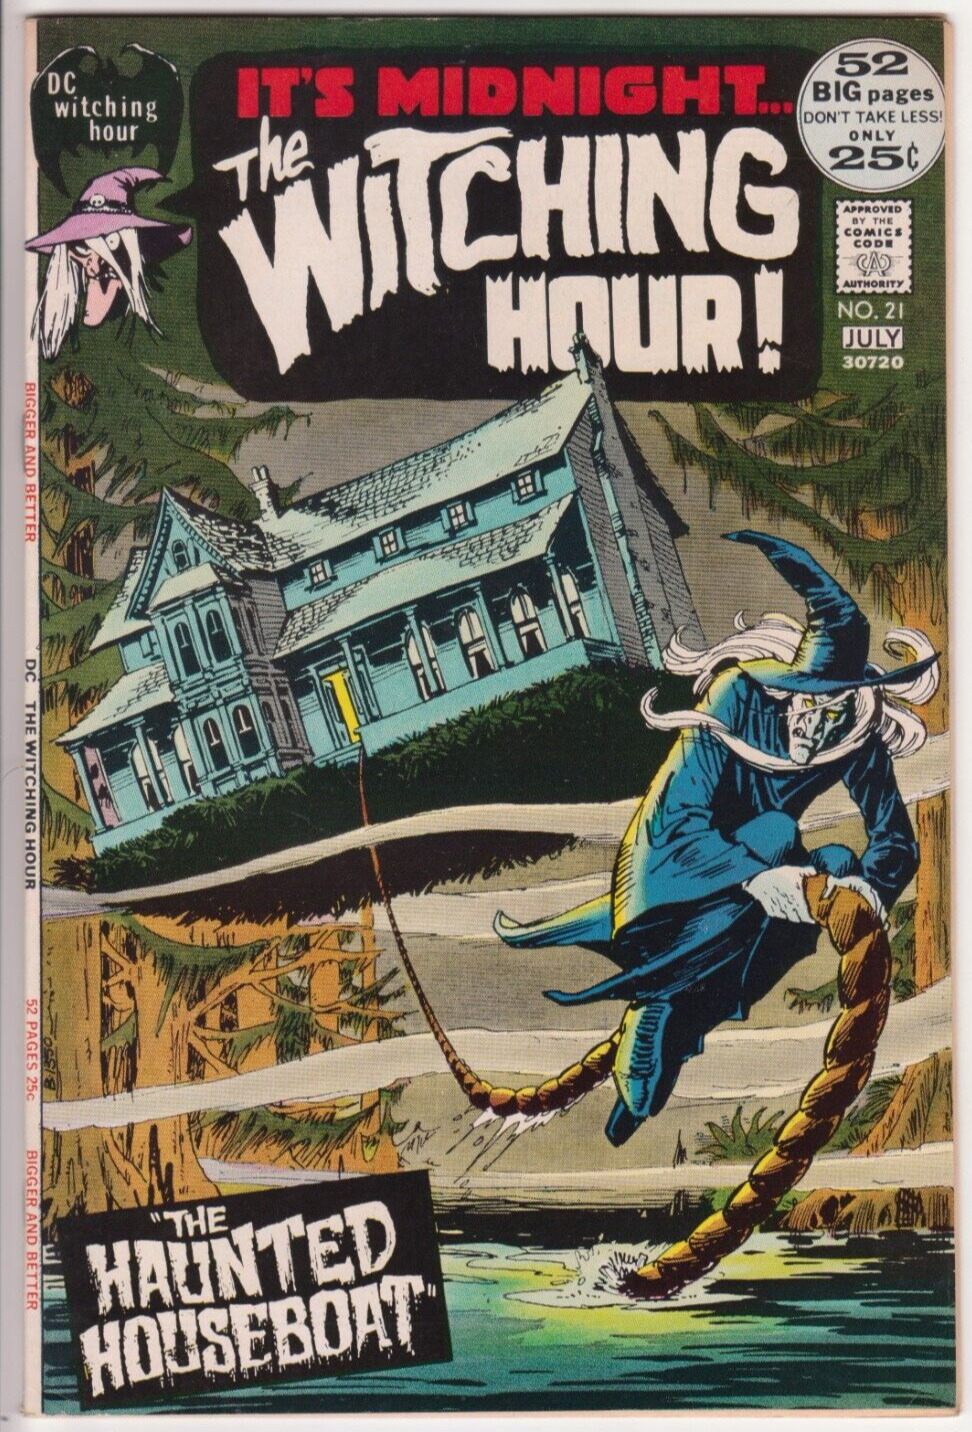 The Witching Hour #21, DC Comics 1972 VF+ 8.5 52 Page Giant Issue. Nick Cardy